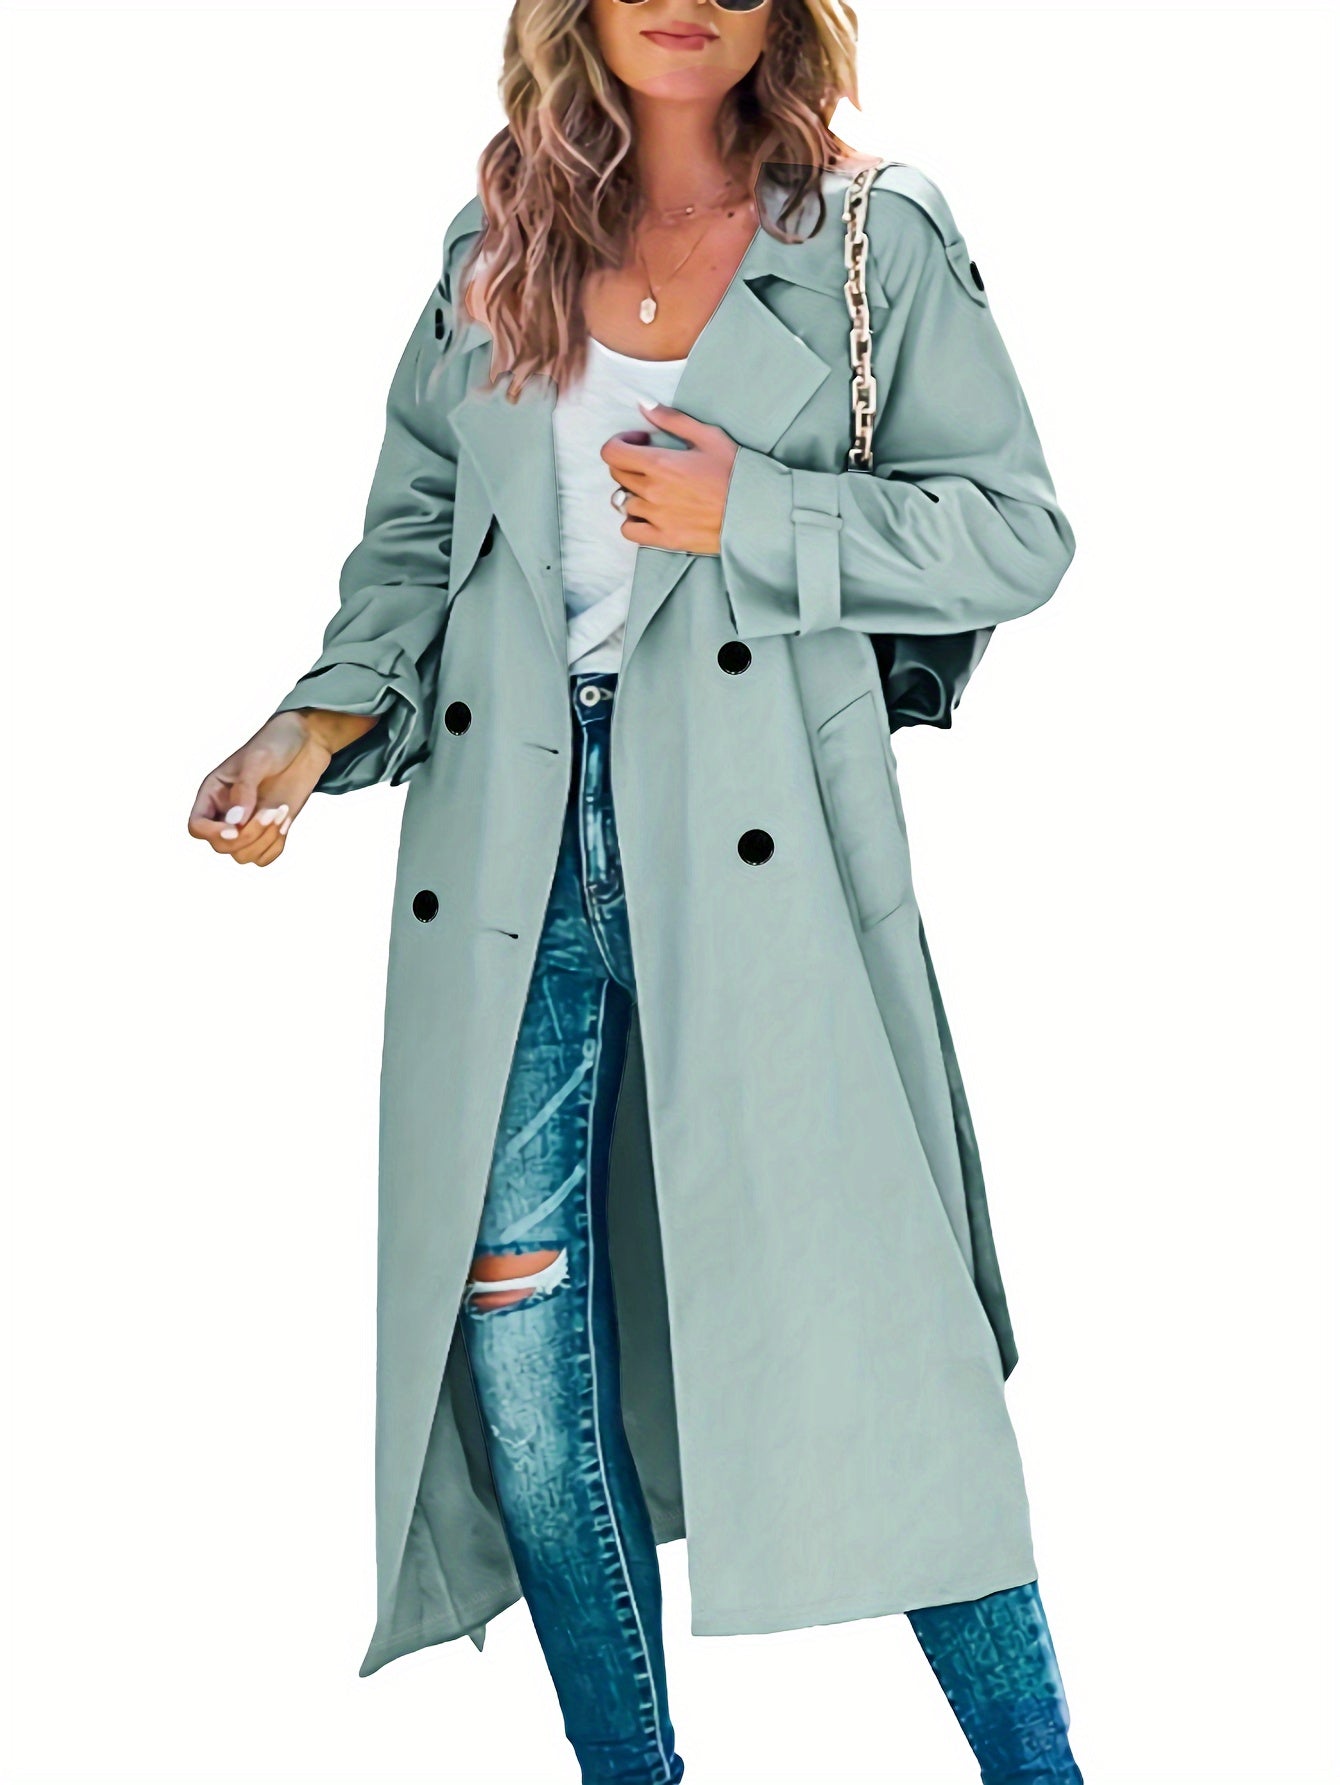 Antmvs Double Breasted Solid Trench Coat, Casual Long Sleeve Mid Length Outerwear, Women's Clothing